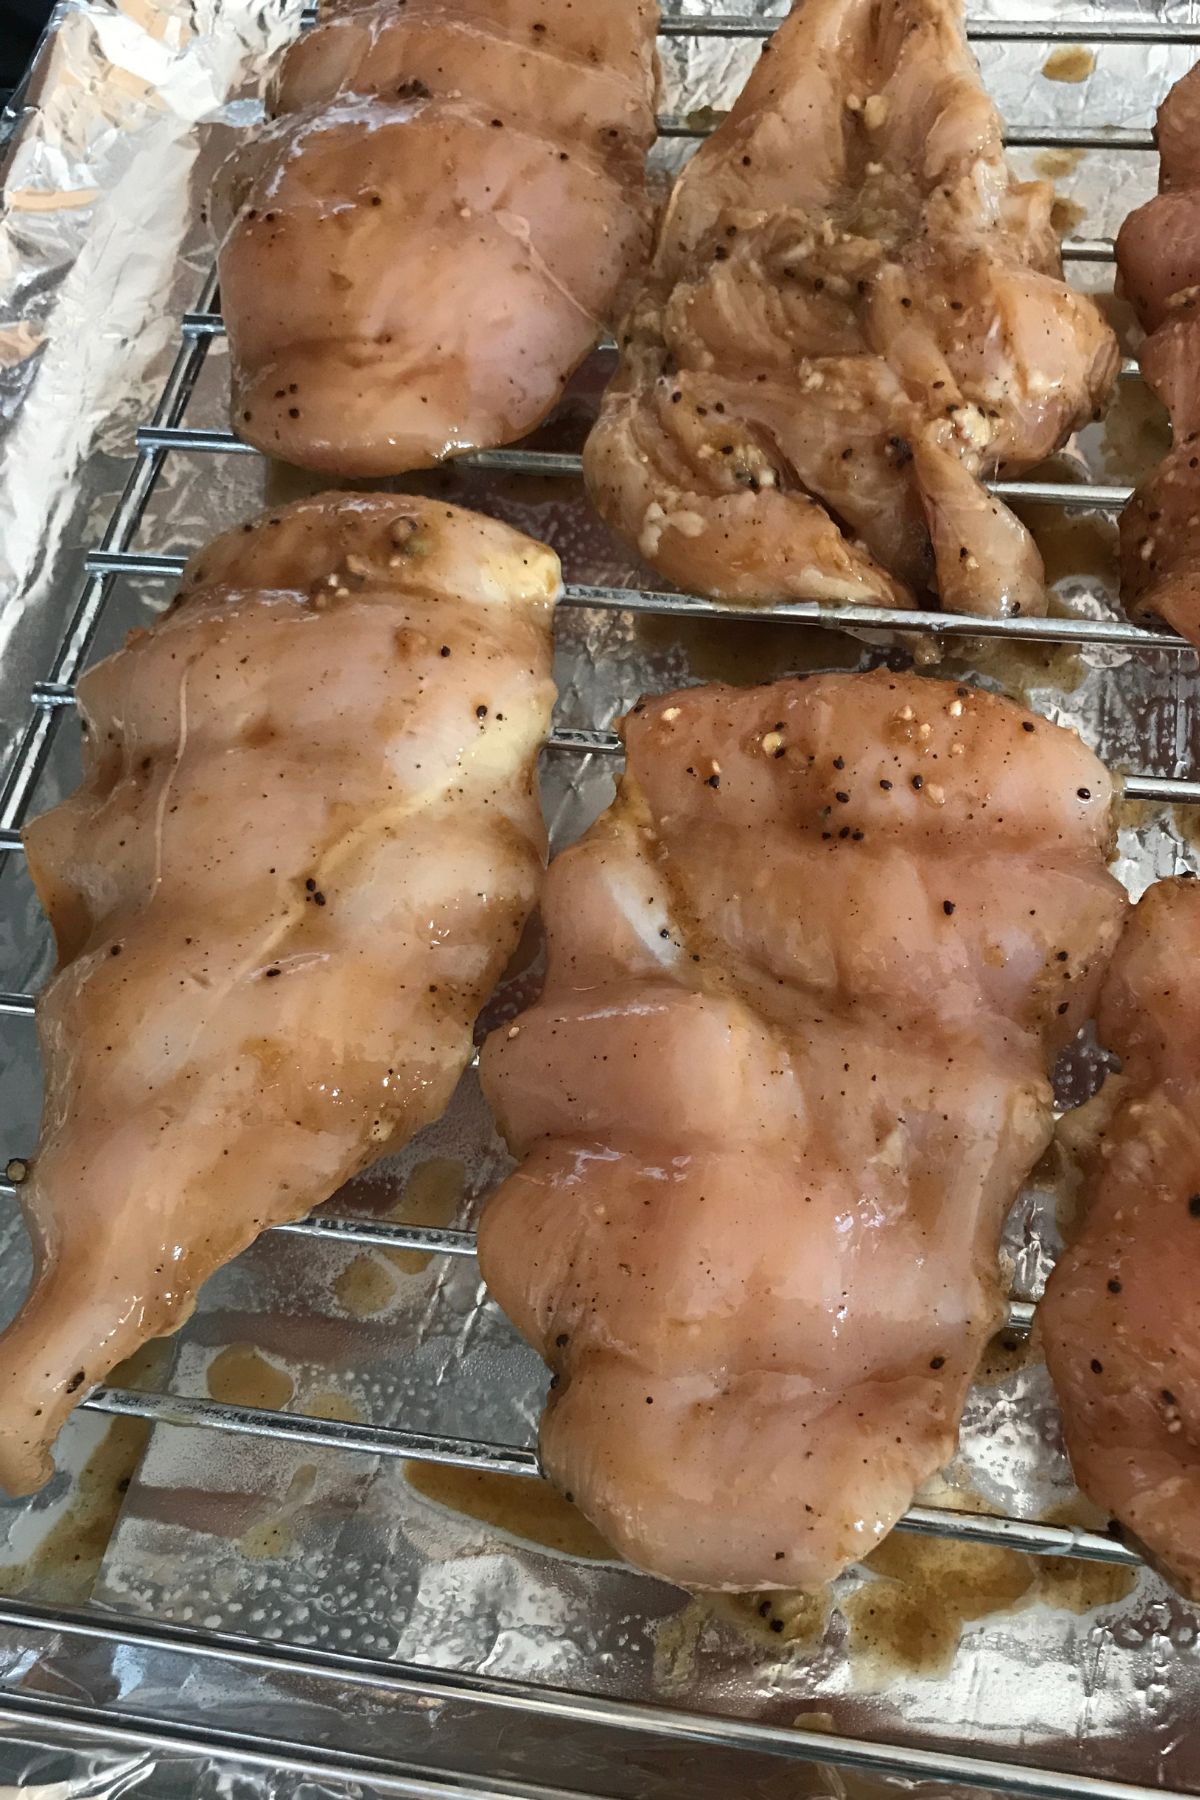 Chick breasts marinated and put on the grill.